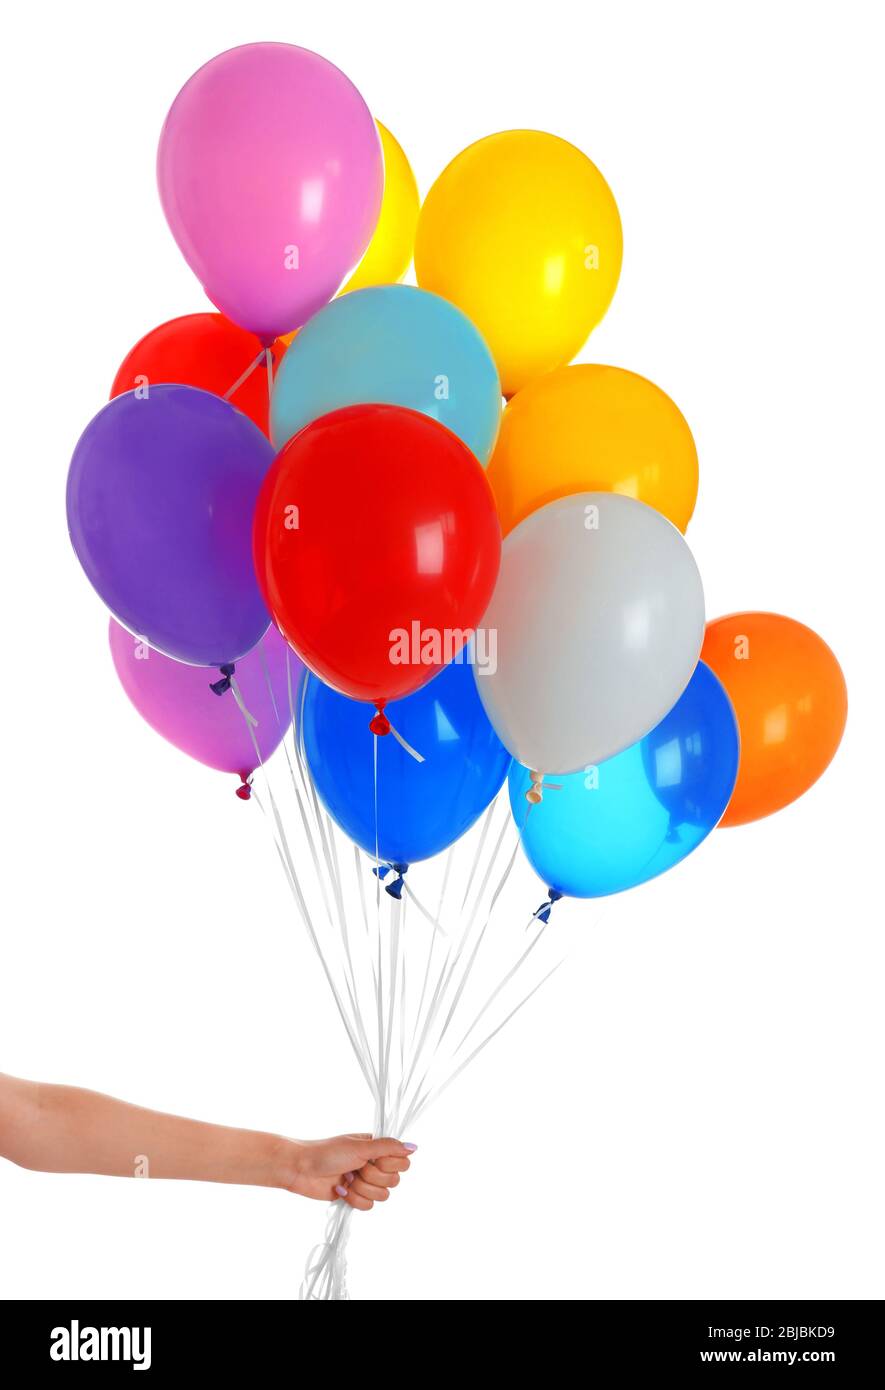 Woman holding many colorful balloons on white background Stock Photo